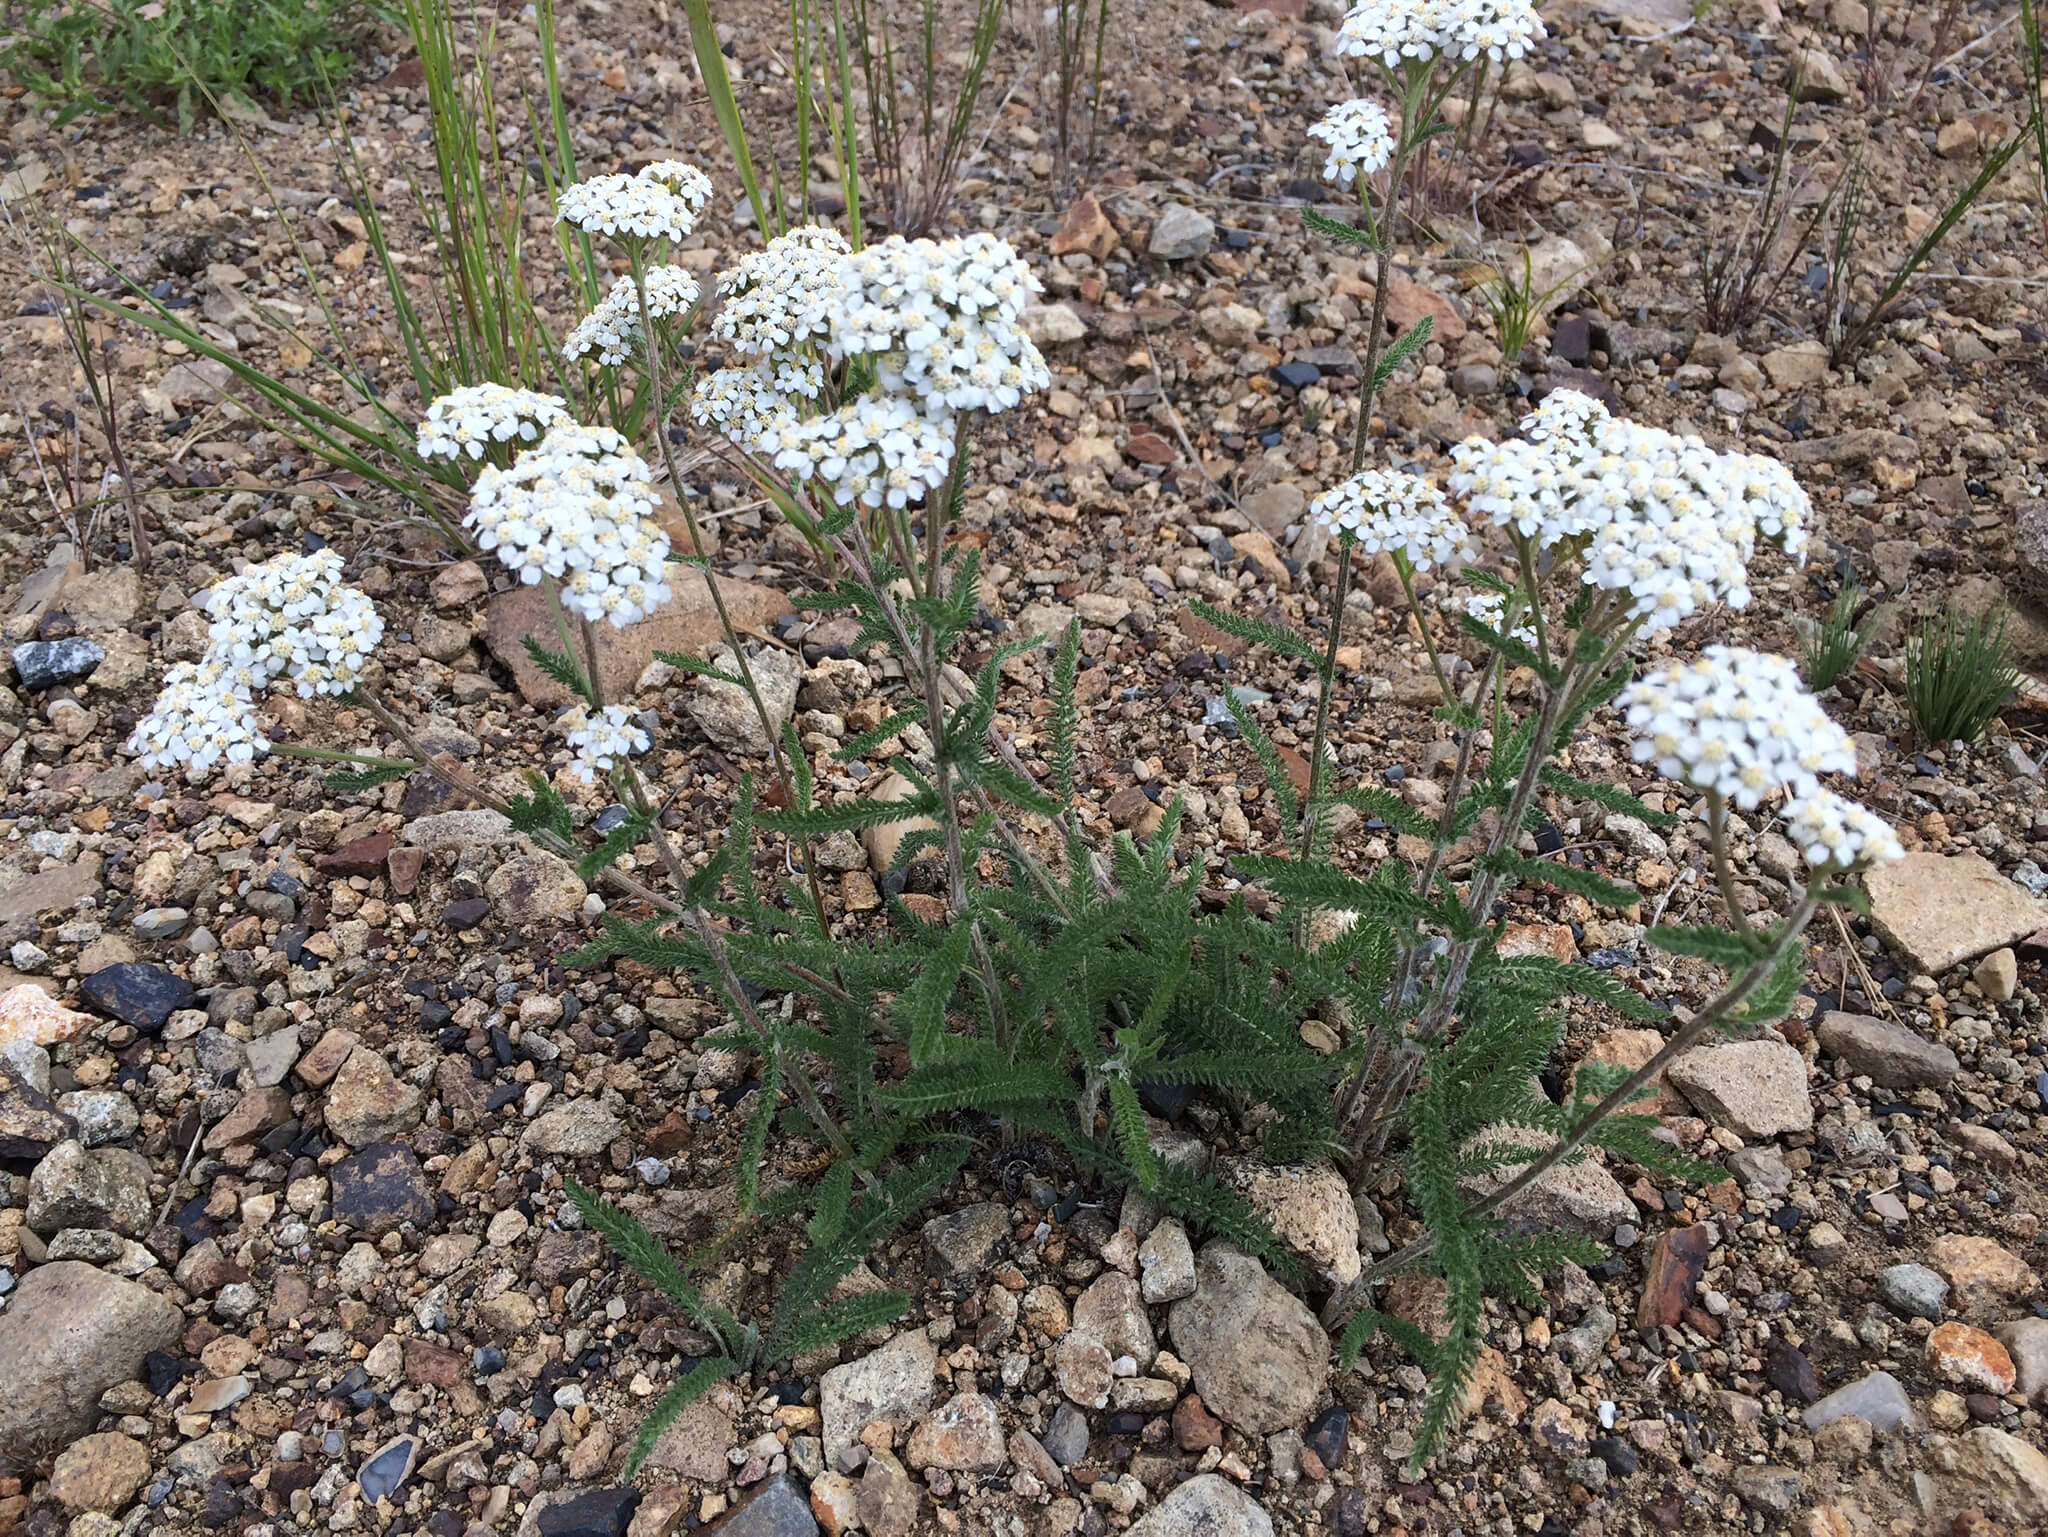 Yarrow:  Loves dry edges of roads and trails. Healing qualities include anti-bacterial properties.